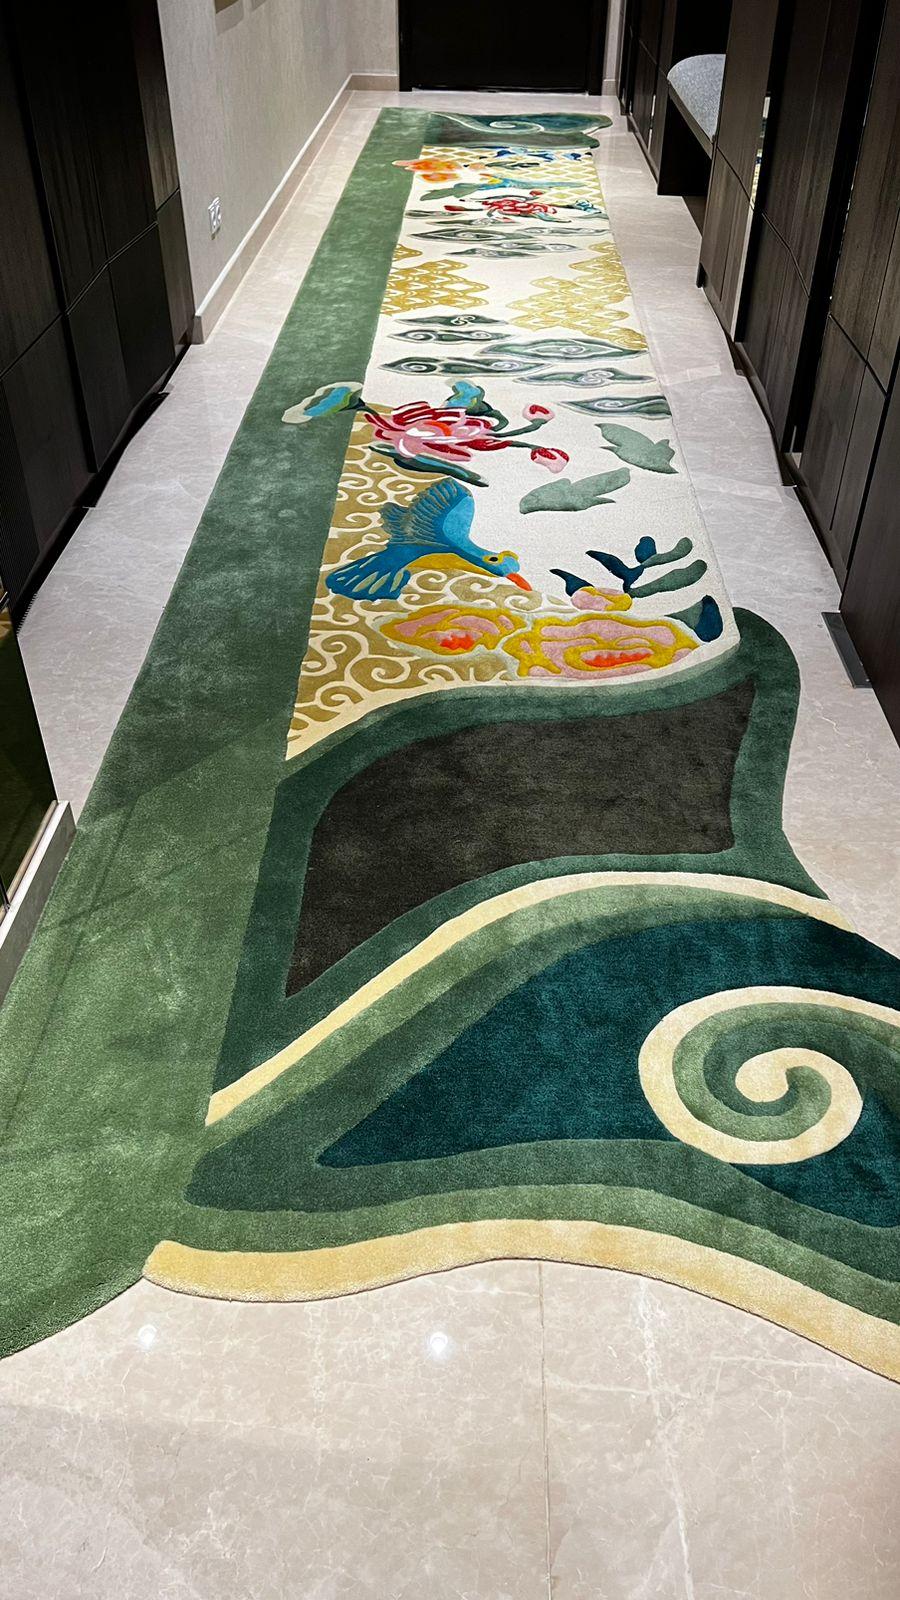 Irregular Shape Chinoiserie Runner Carpet Inspired by ancient graphics and illustrations of Chinese Origin, adapted to fuse seamlessly with a contemporary interior. Fine works of art hand tufted from exquisite yarns.

RAG under this brand, lies a